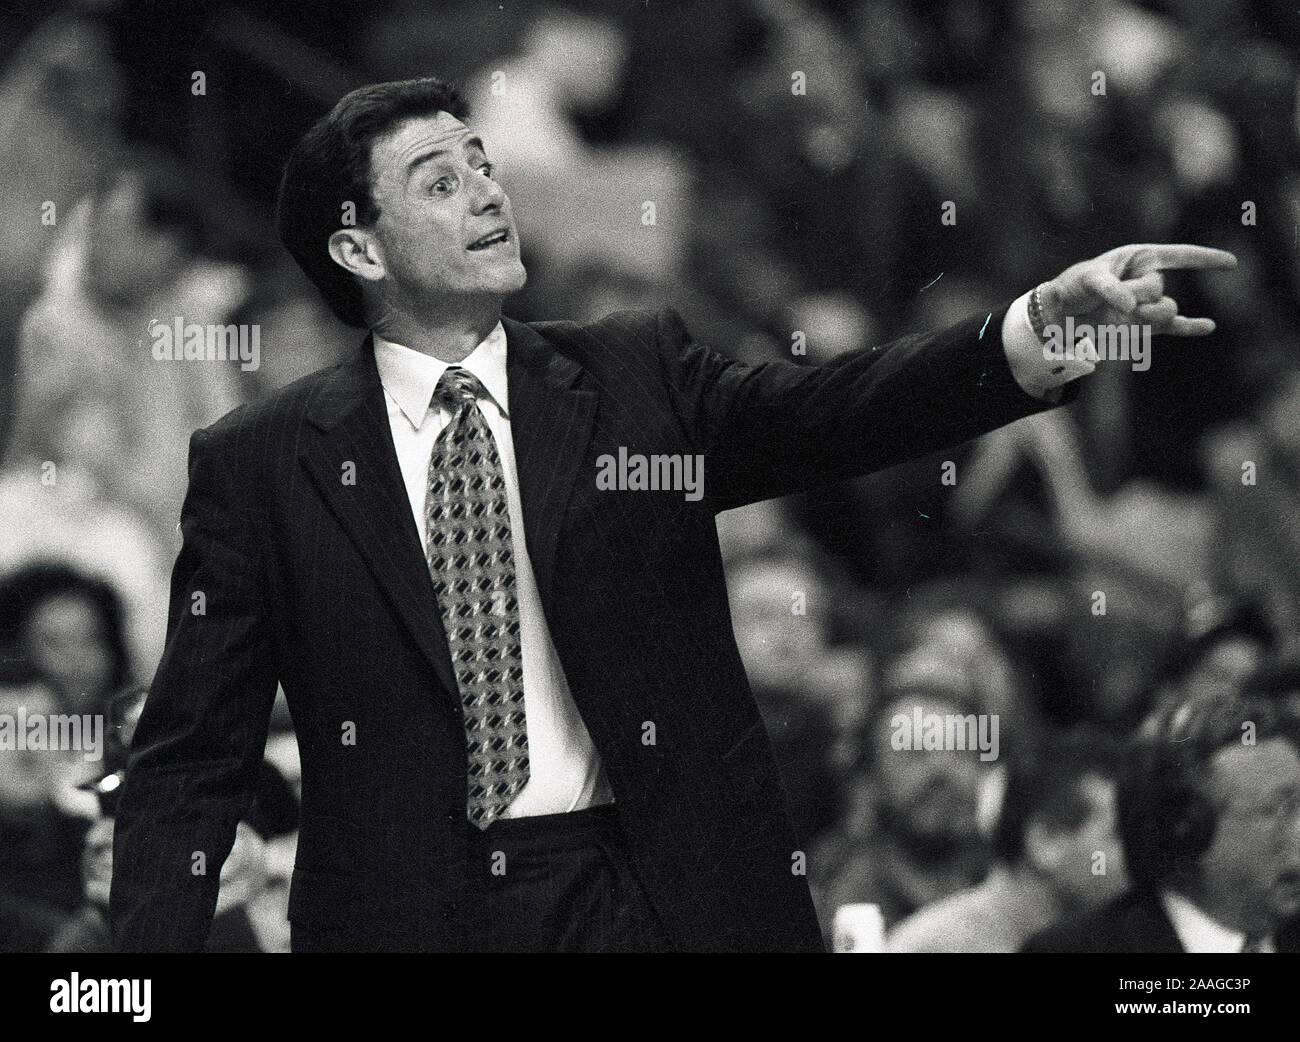 1986 nba championship hi-res stock photography and images - Alamy